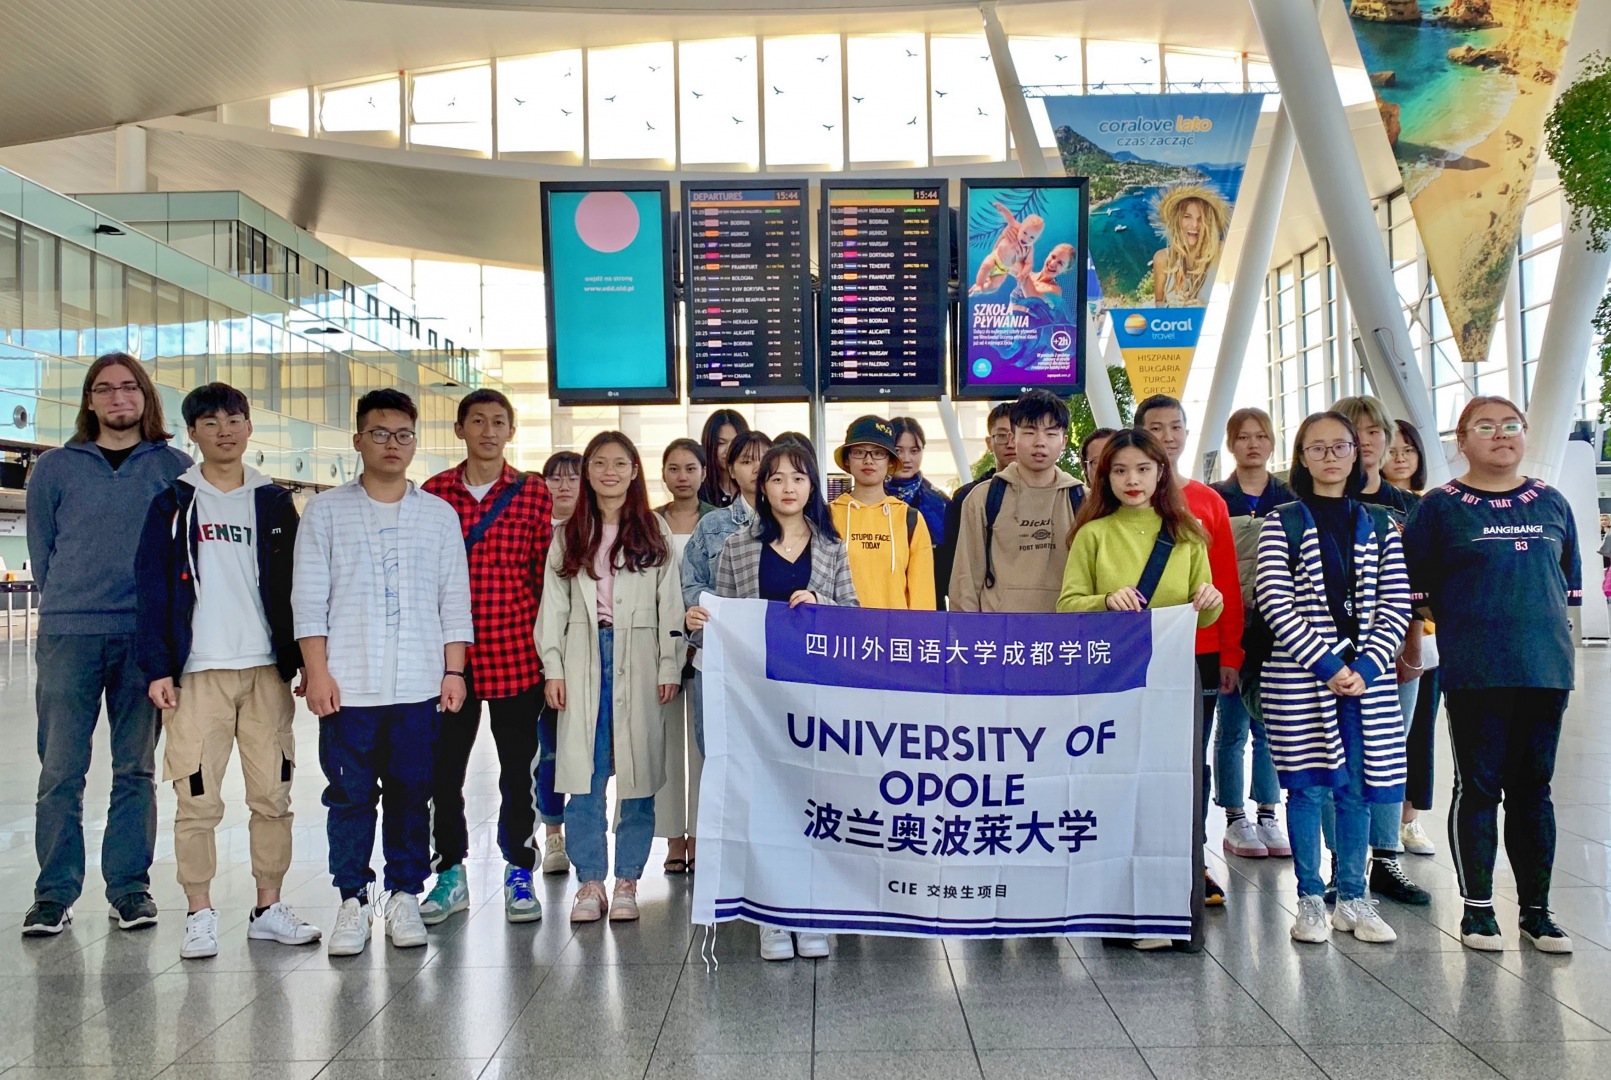 A group of our Chinese students has just arrived to Poland. They will study English in Public Communication at the University of Opole